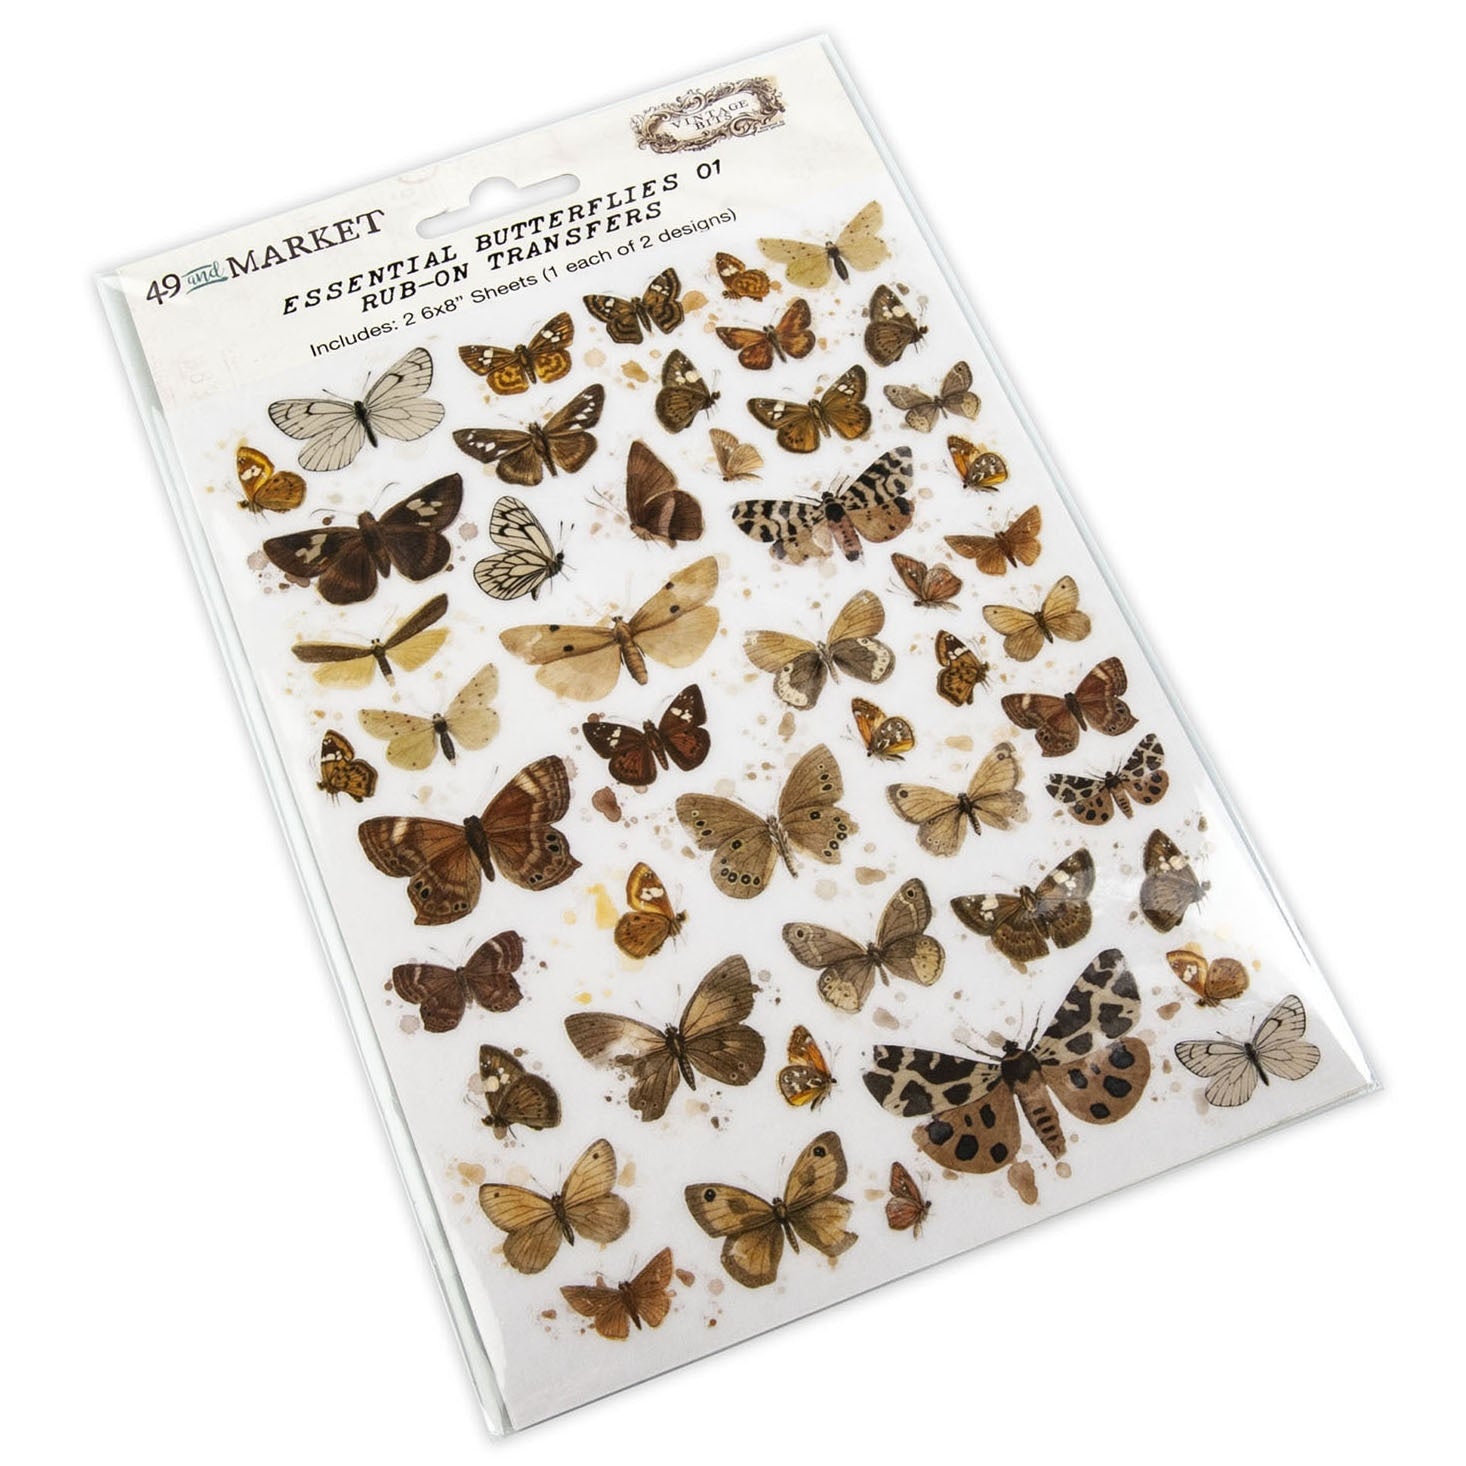 Butterflies 01 - Essential Rub-Ons - 6x8 Inch - 2/Sheets - 49 And Market